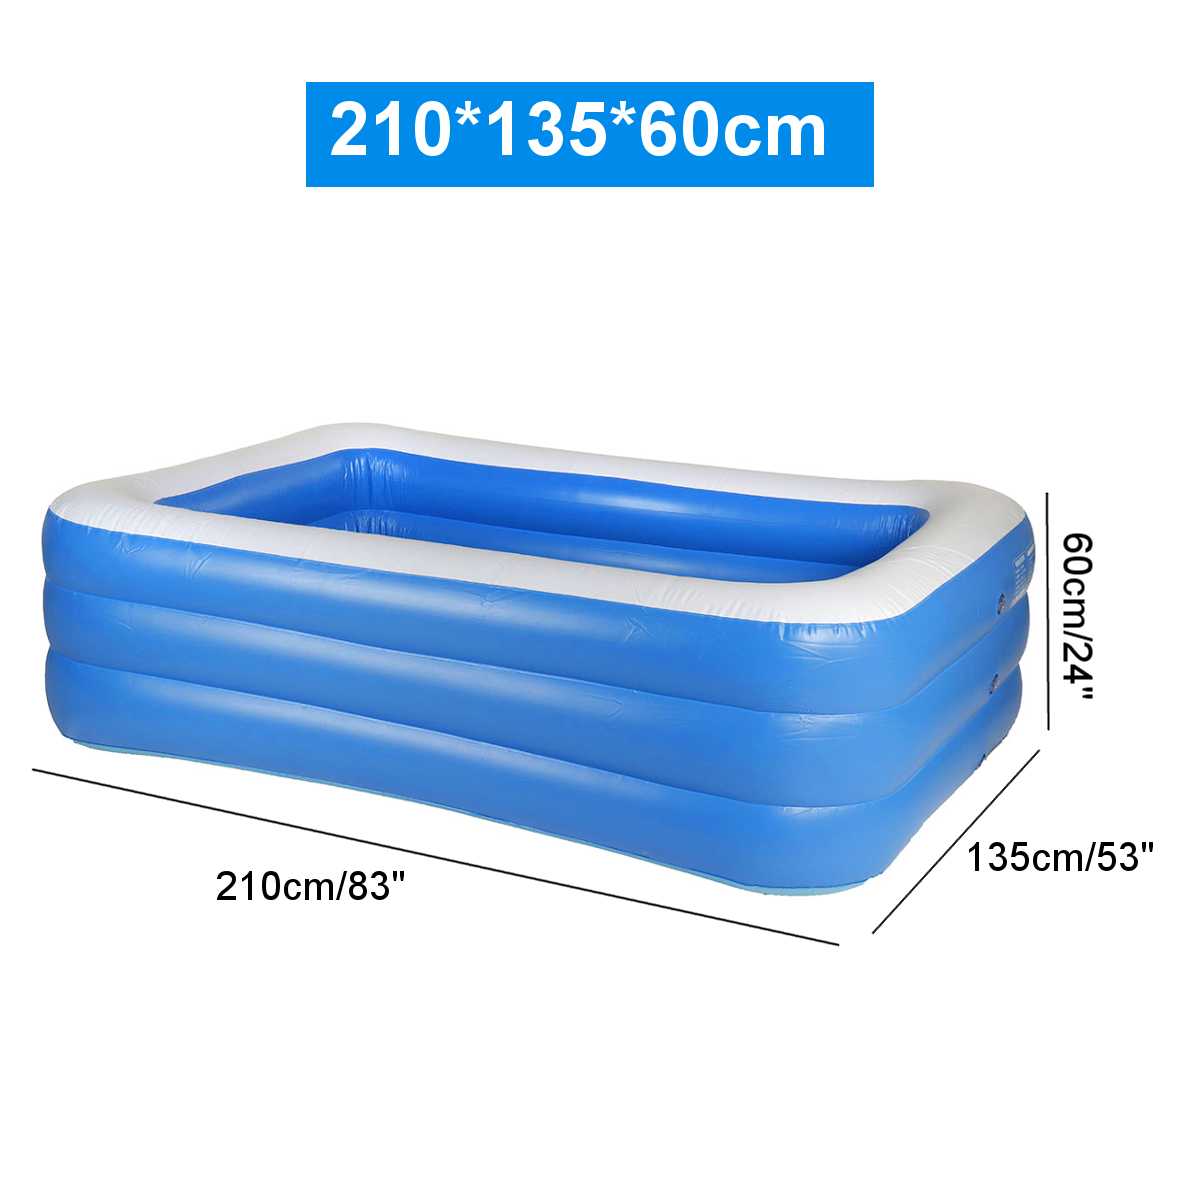 PVC-Thickened-Childrens-Inflatable-Swimming-Pool-Childrens-Pool-Capacity-Large-Bath-Tub-Outdoor-Indo-1842748-10